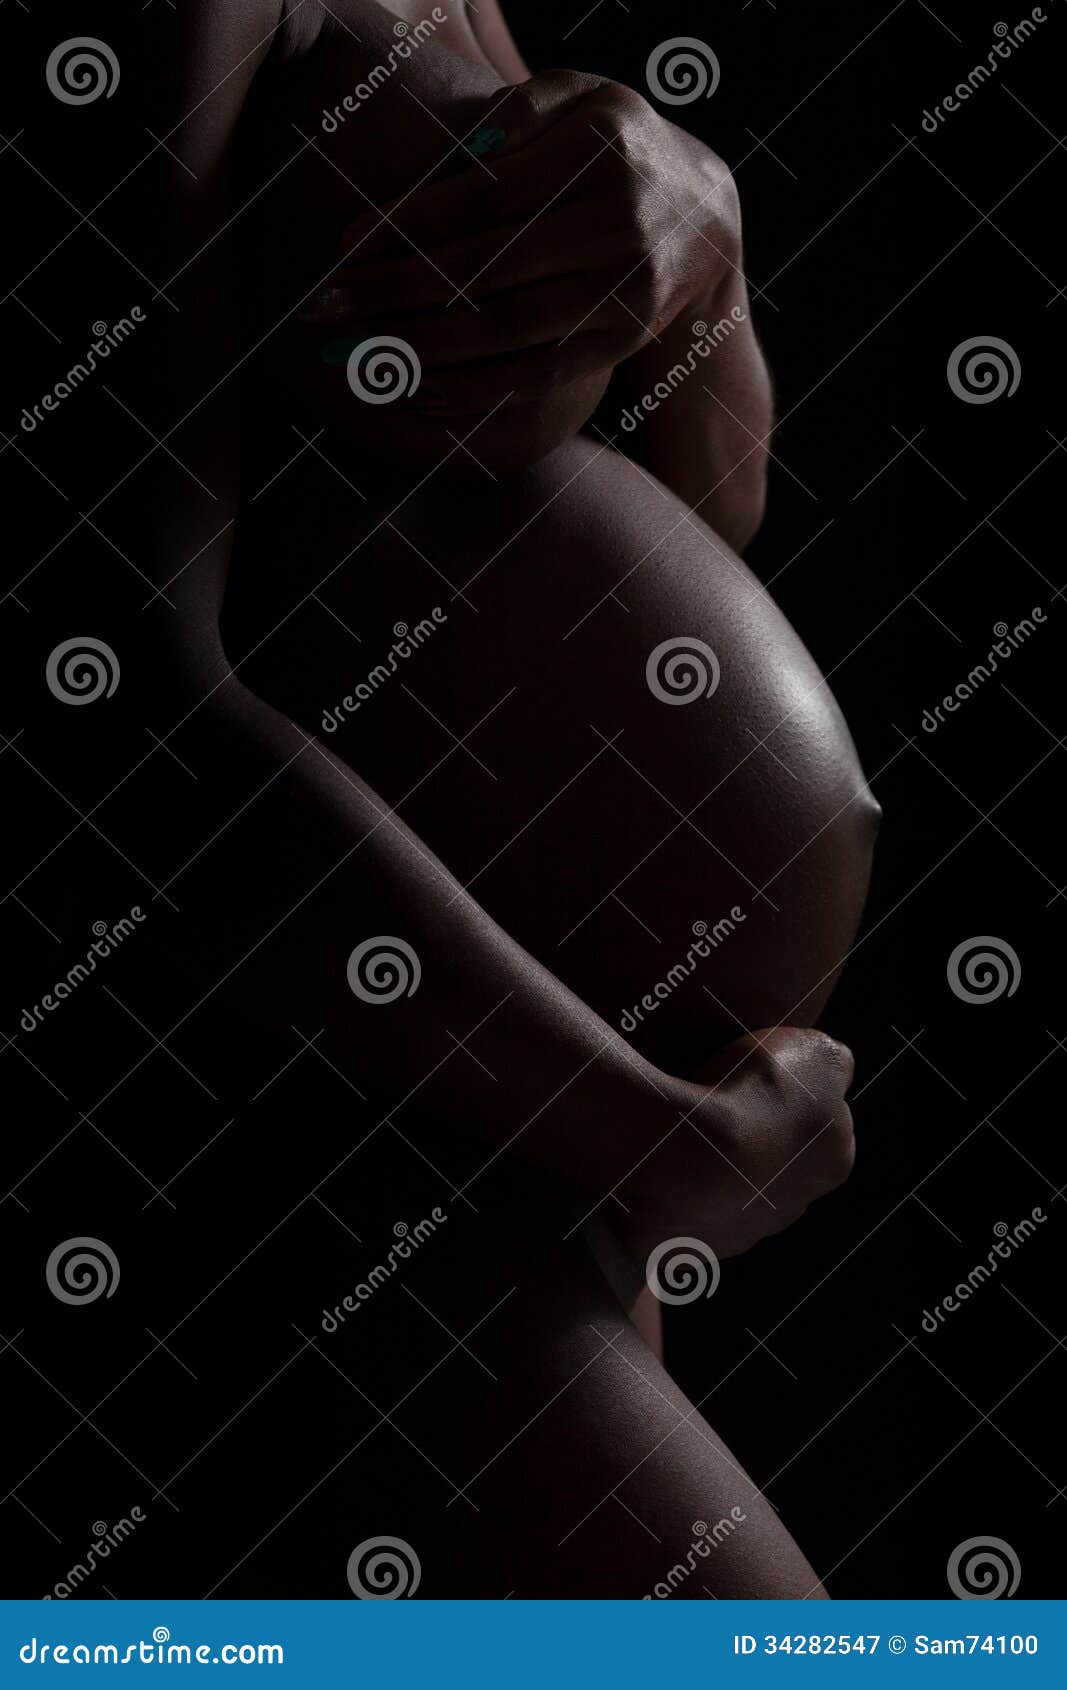 Pregnant African American Woman Body Silhouette - Black People Royalty